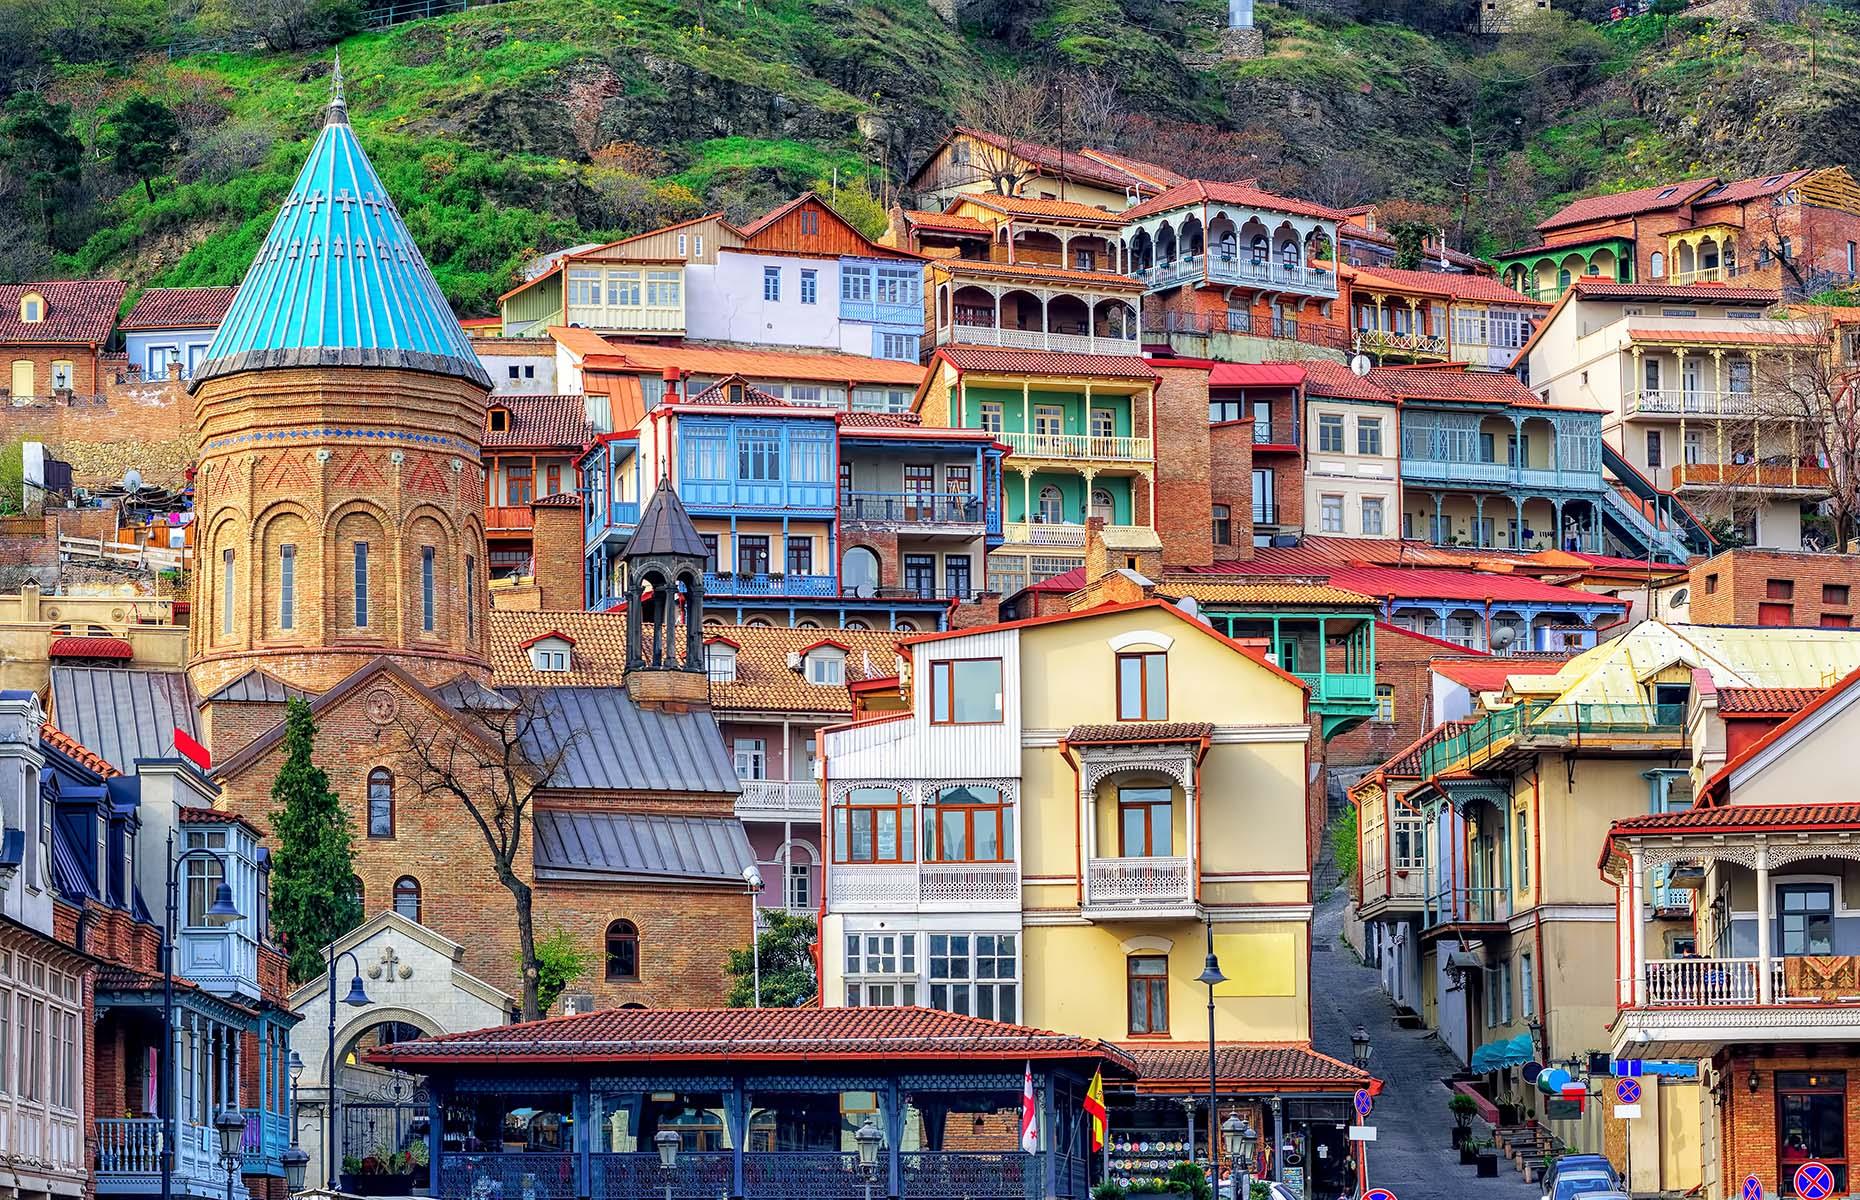 <p>It might not have entirely escaped the eye of tourists but it's fair to say the capital of this small Caucasus nation isn't one of Europe's big hitters. Those who do visit congregate in the delightful old quarter where most of Tbilisi's historical sights (including <a href="https://georgiantravelguide.com/en/narikala-fortress">Narikala Fortress</a>), cafés, bars, museums and charming streets are to be found. Incredible food and wines are another huge reason to seek out this city. Those looking to relax should check out the city's traditional hot sulphur bathhouses.</p>